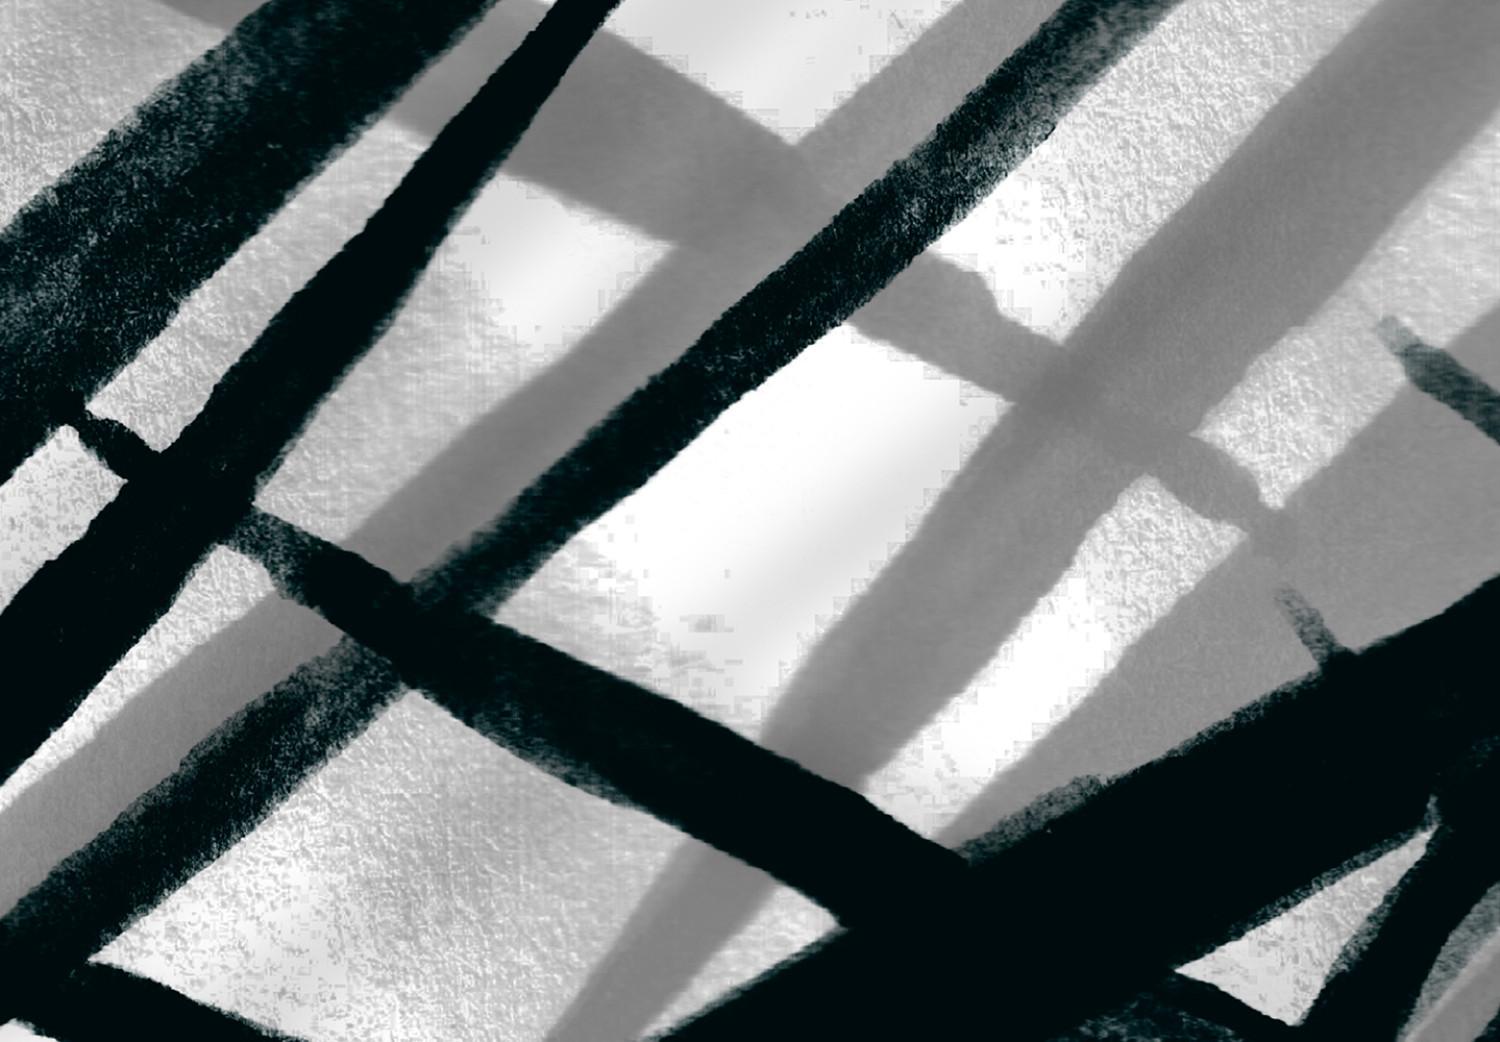 Poster In the Shade of Leaves - black and white leaves casting shadows on a white wall